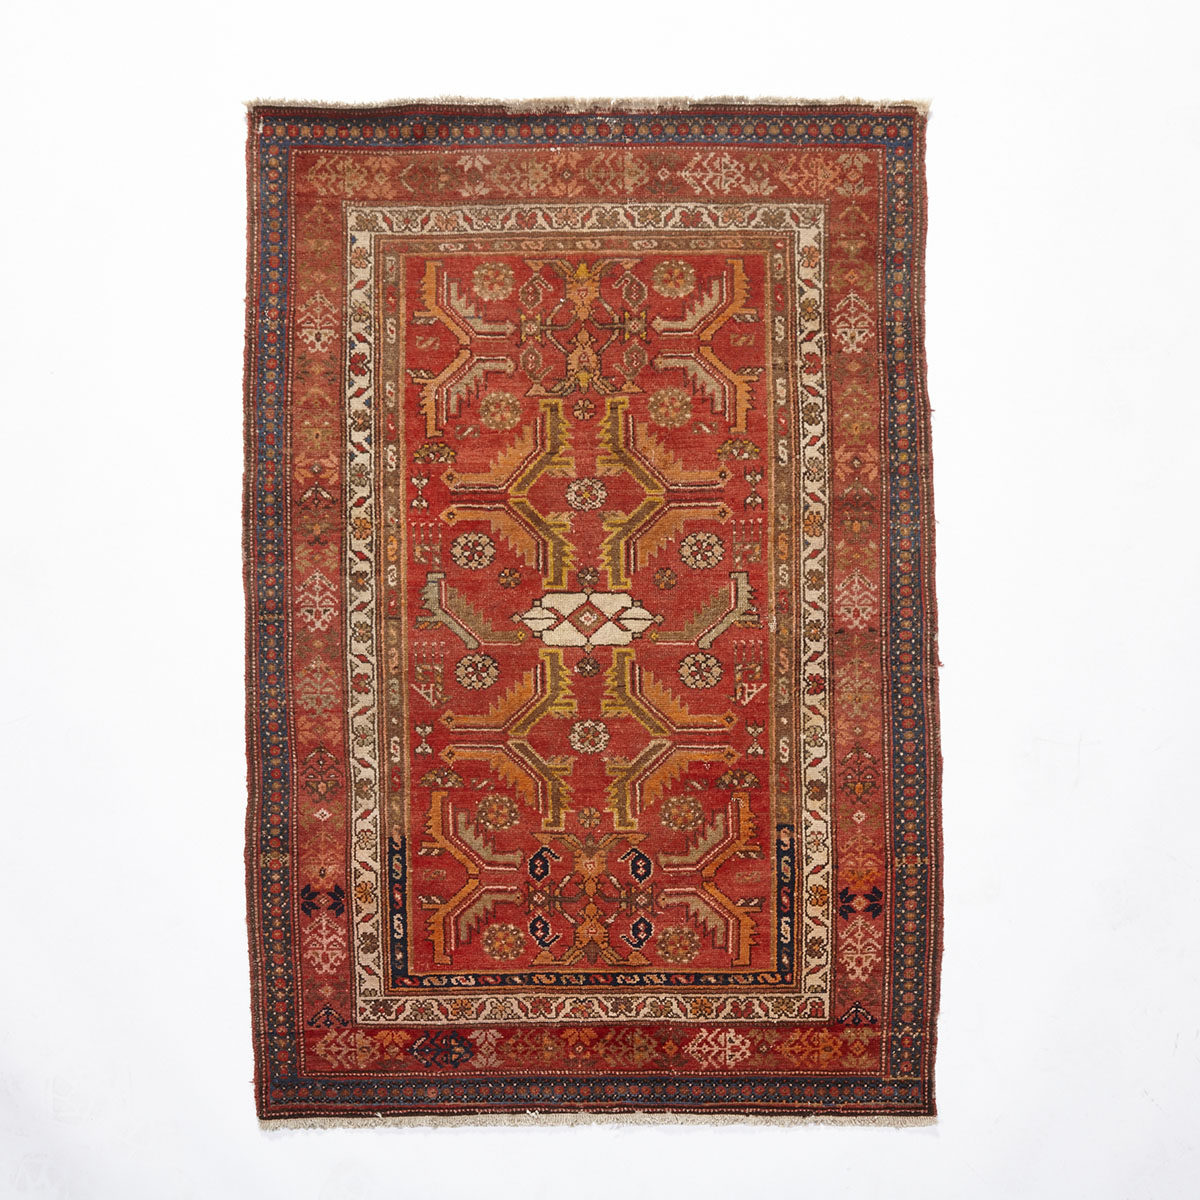 Malayer Rug, early 20th century